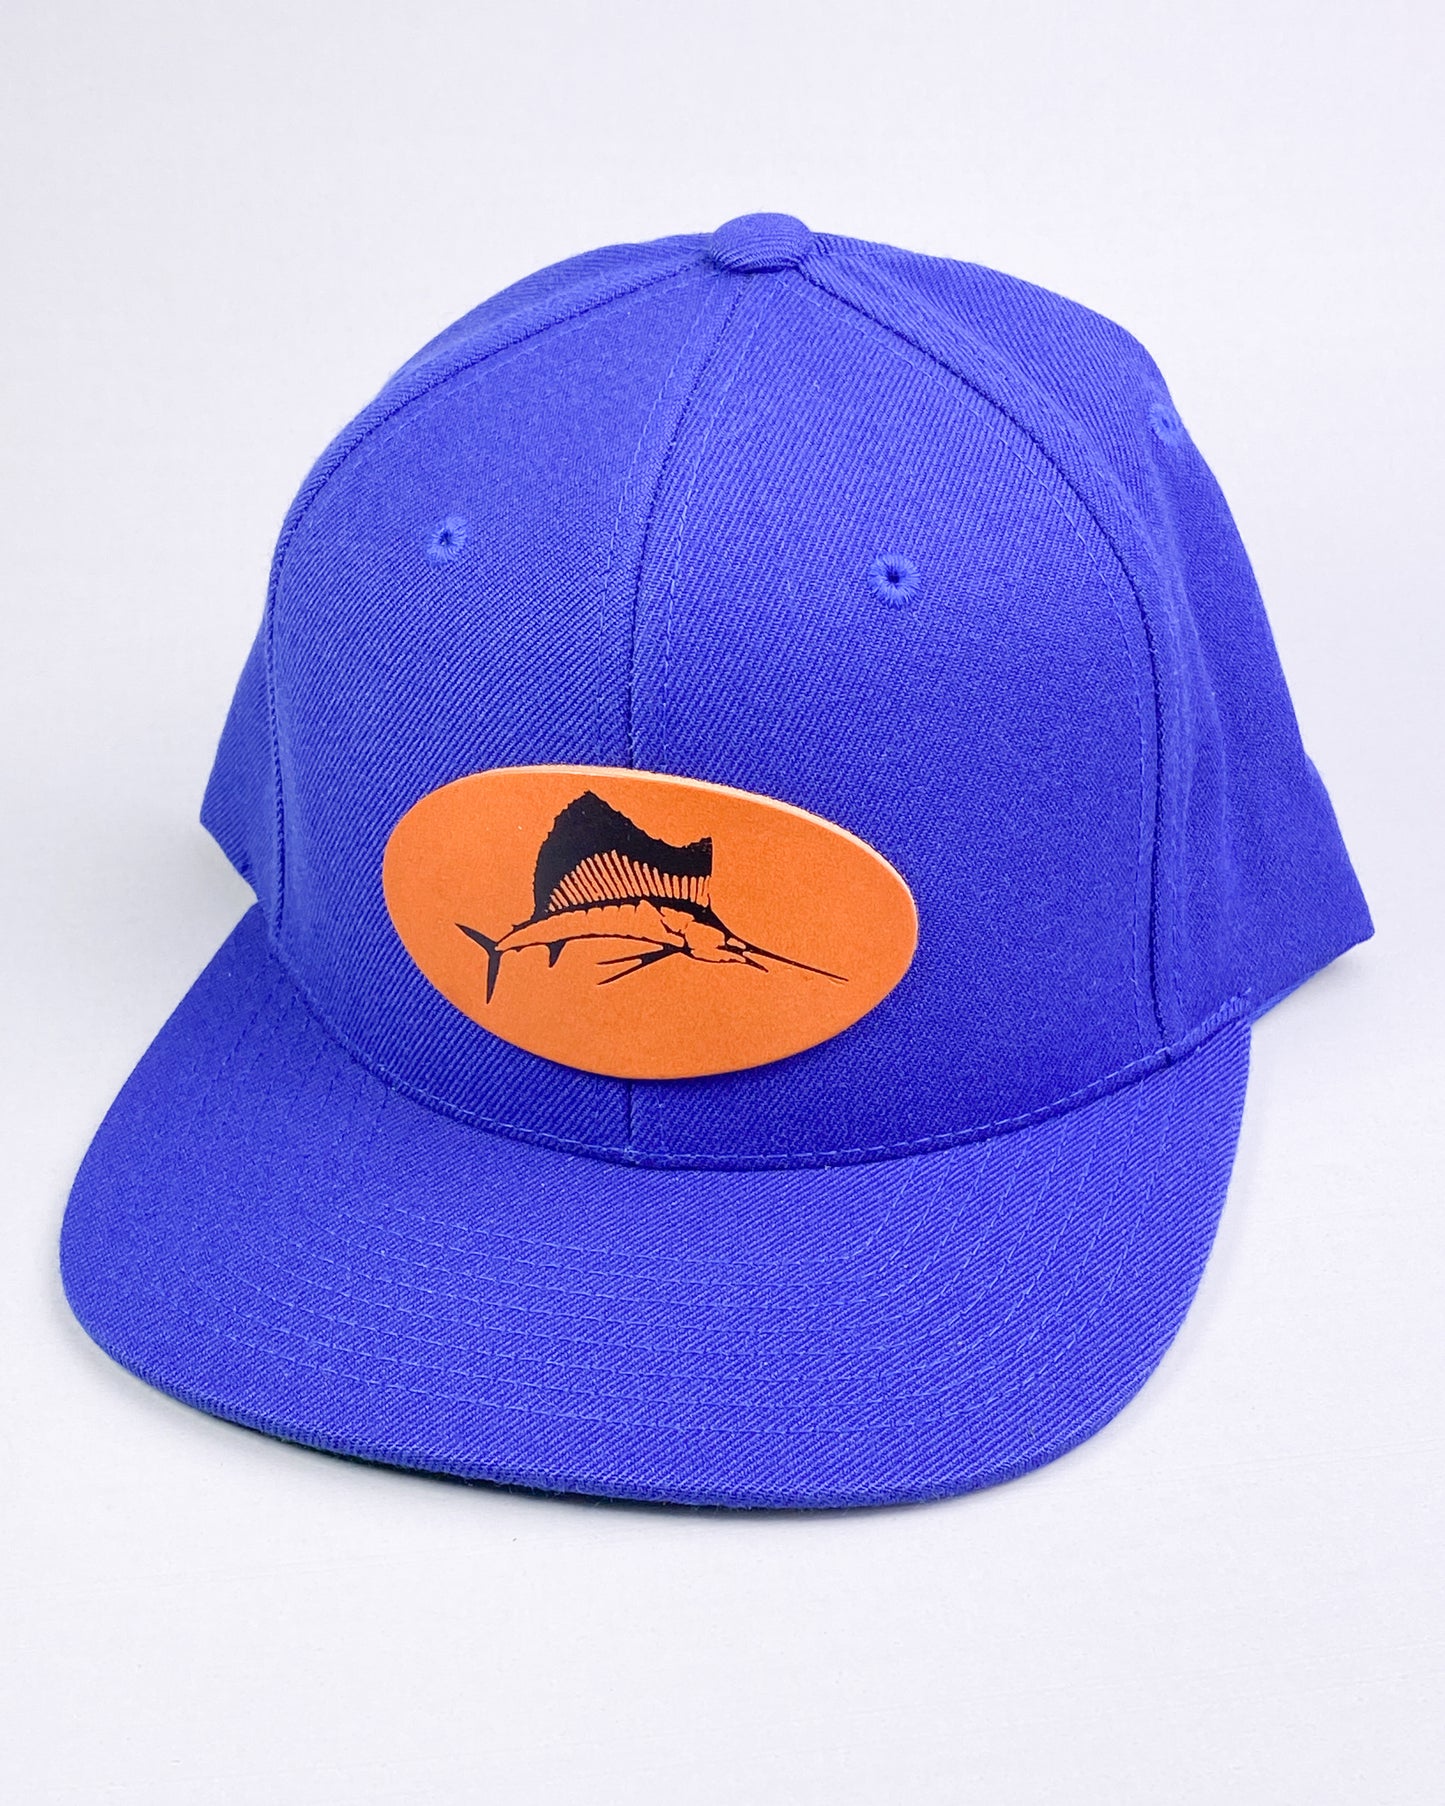 Bravo Premium hat in royal blue with sailfish design leather patch